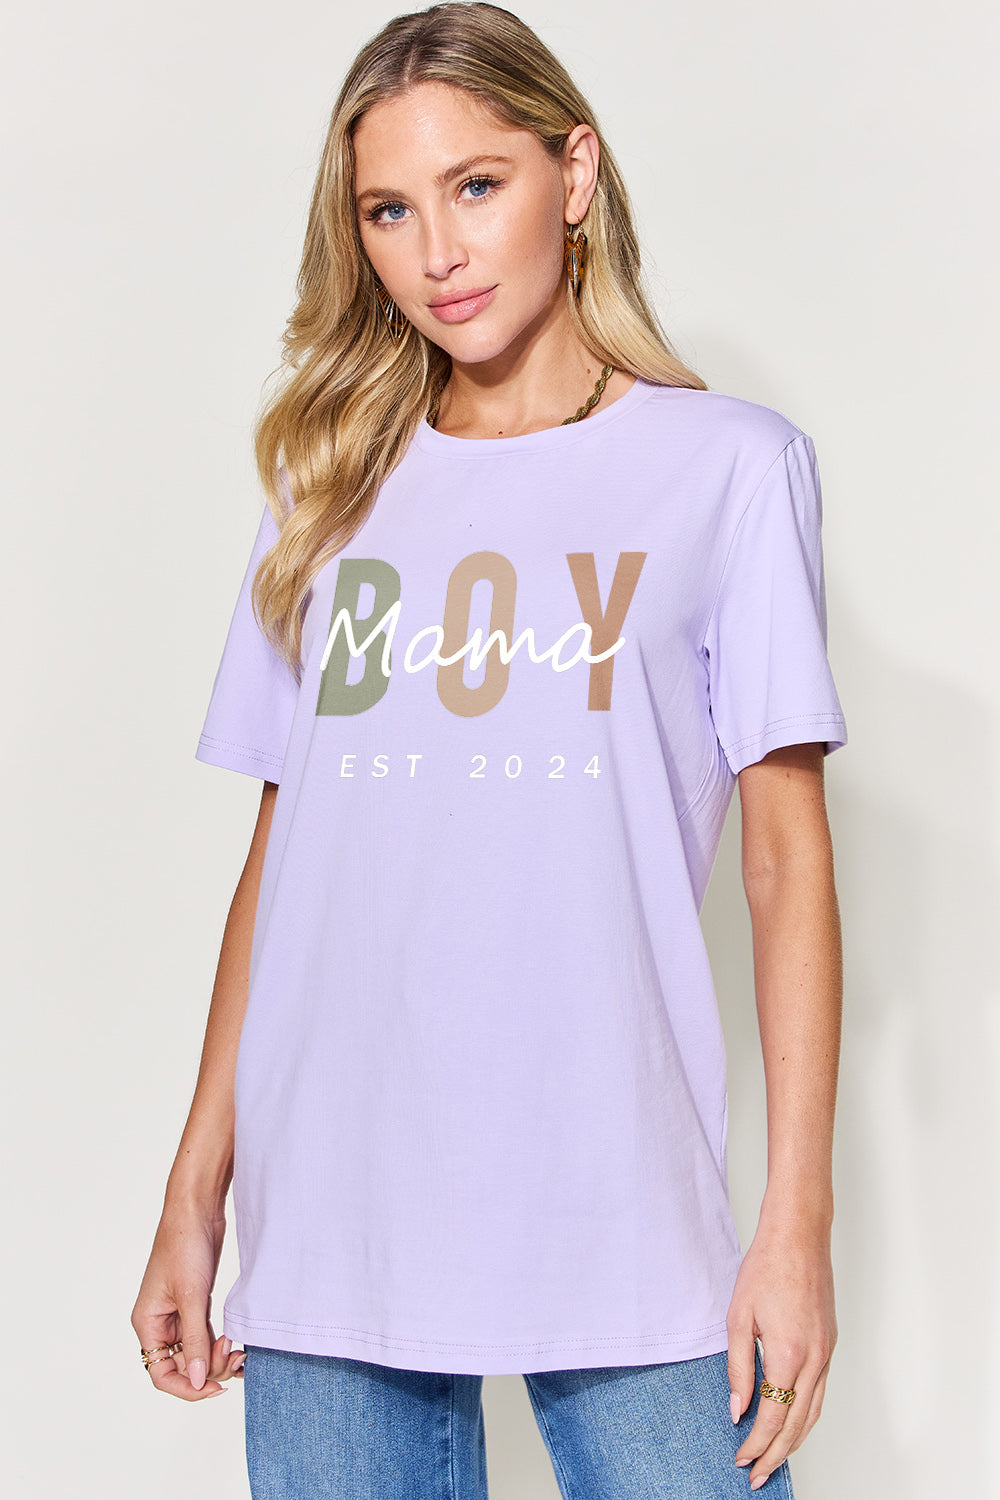 Simply Love Full Size Letter Graphic Round Neck Short Sleeve T-Shirt  | KIKI COUTURE